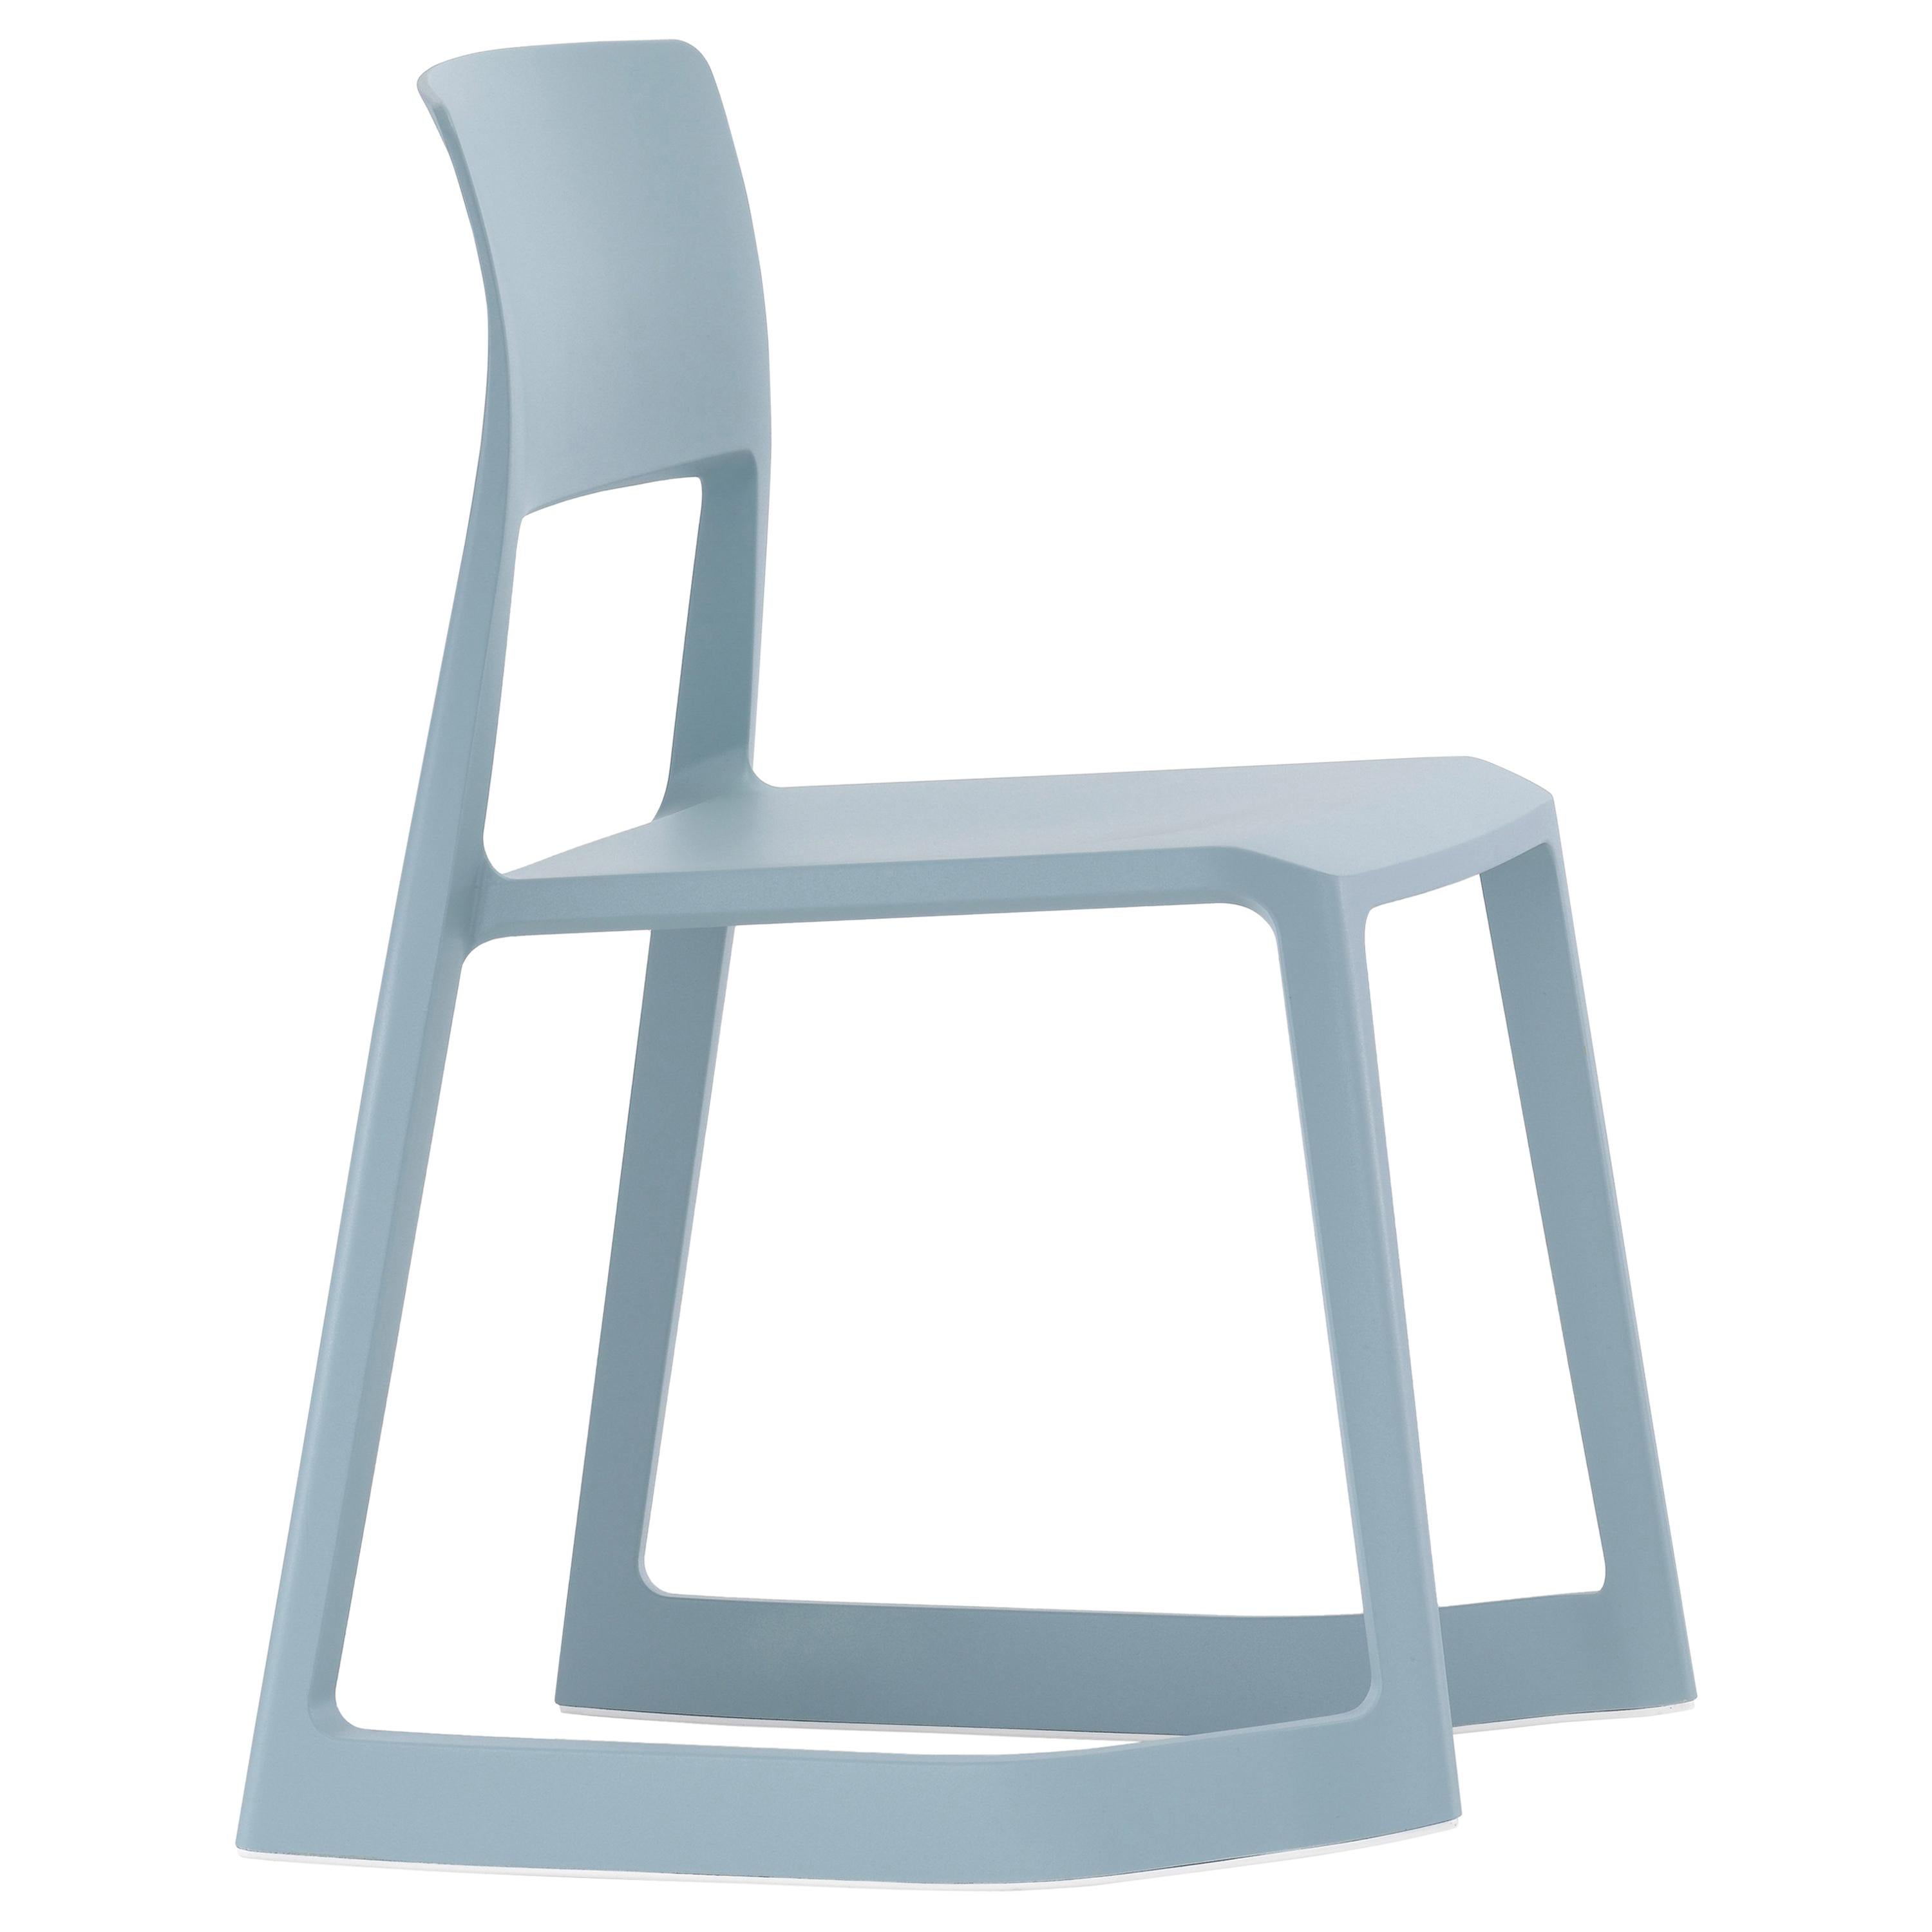 Vitra Tip Ton Chair in Ice Gray Edward Barber & Jay Osgerby For Sale